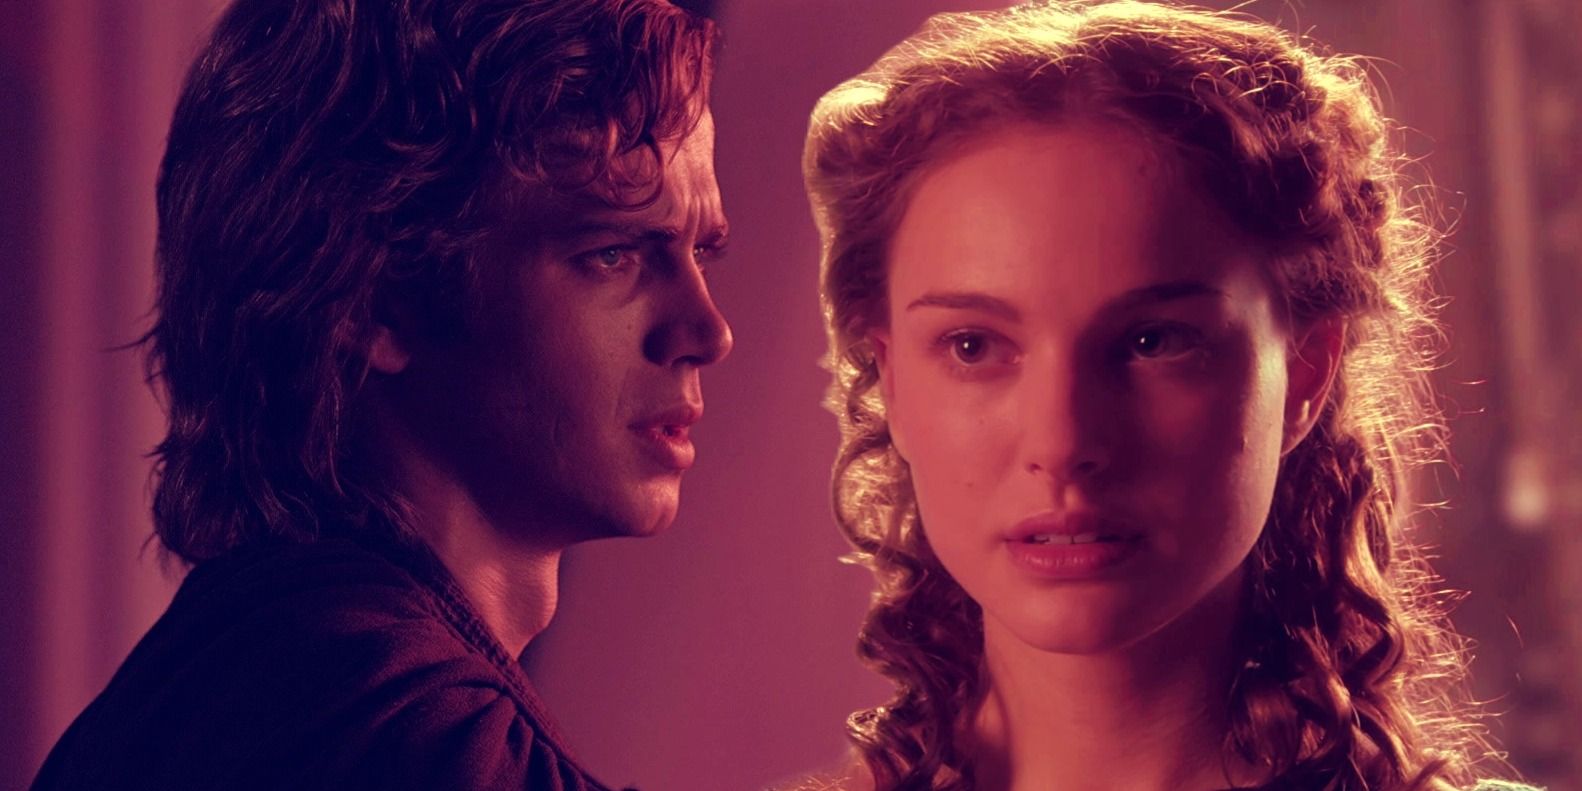 Anakin Skywalker from Revenge of the Sith looking upset to the left and Padme from Attack of the Clones looking concerned to the right in a combined image with a reddish hue